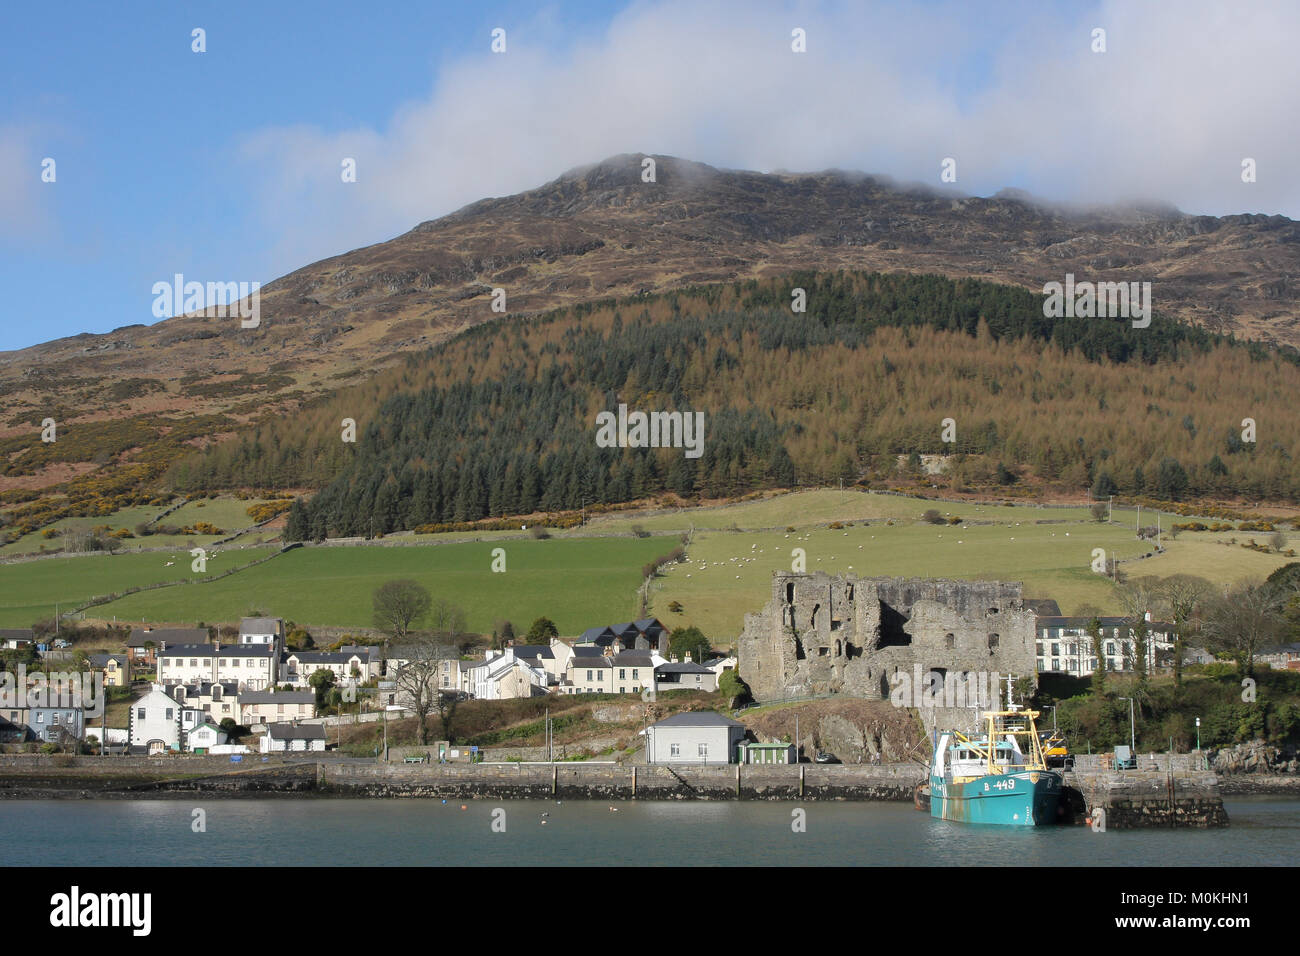 The coastal town of Carlingford, County Louth Ireland. King John's castle and Carlingford Harbour sit at the base of Slieve Foy, Cooley Peninsula. Stock Photo